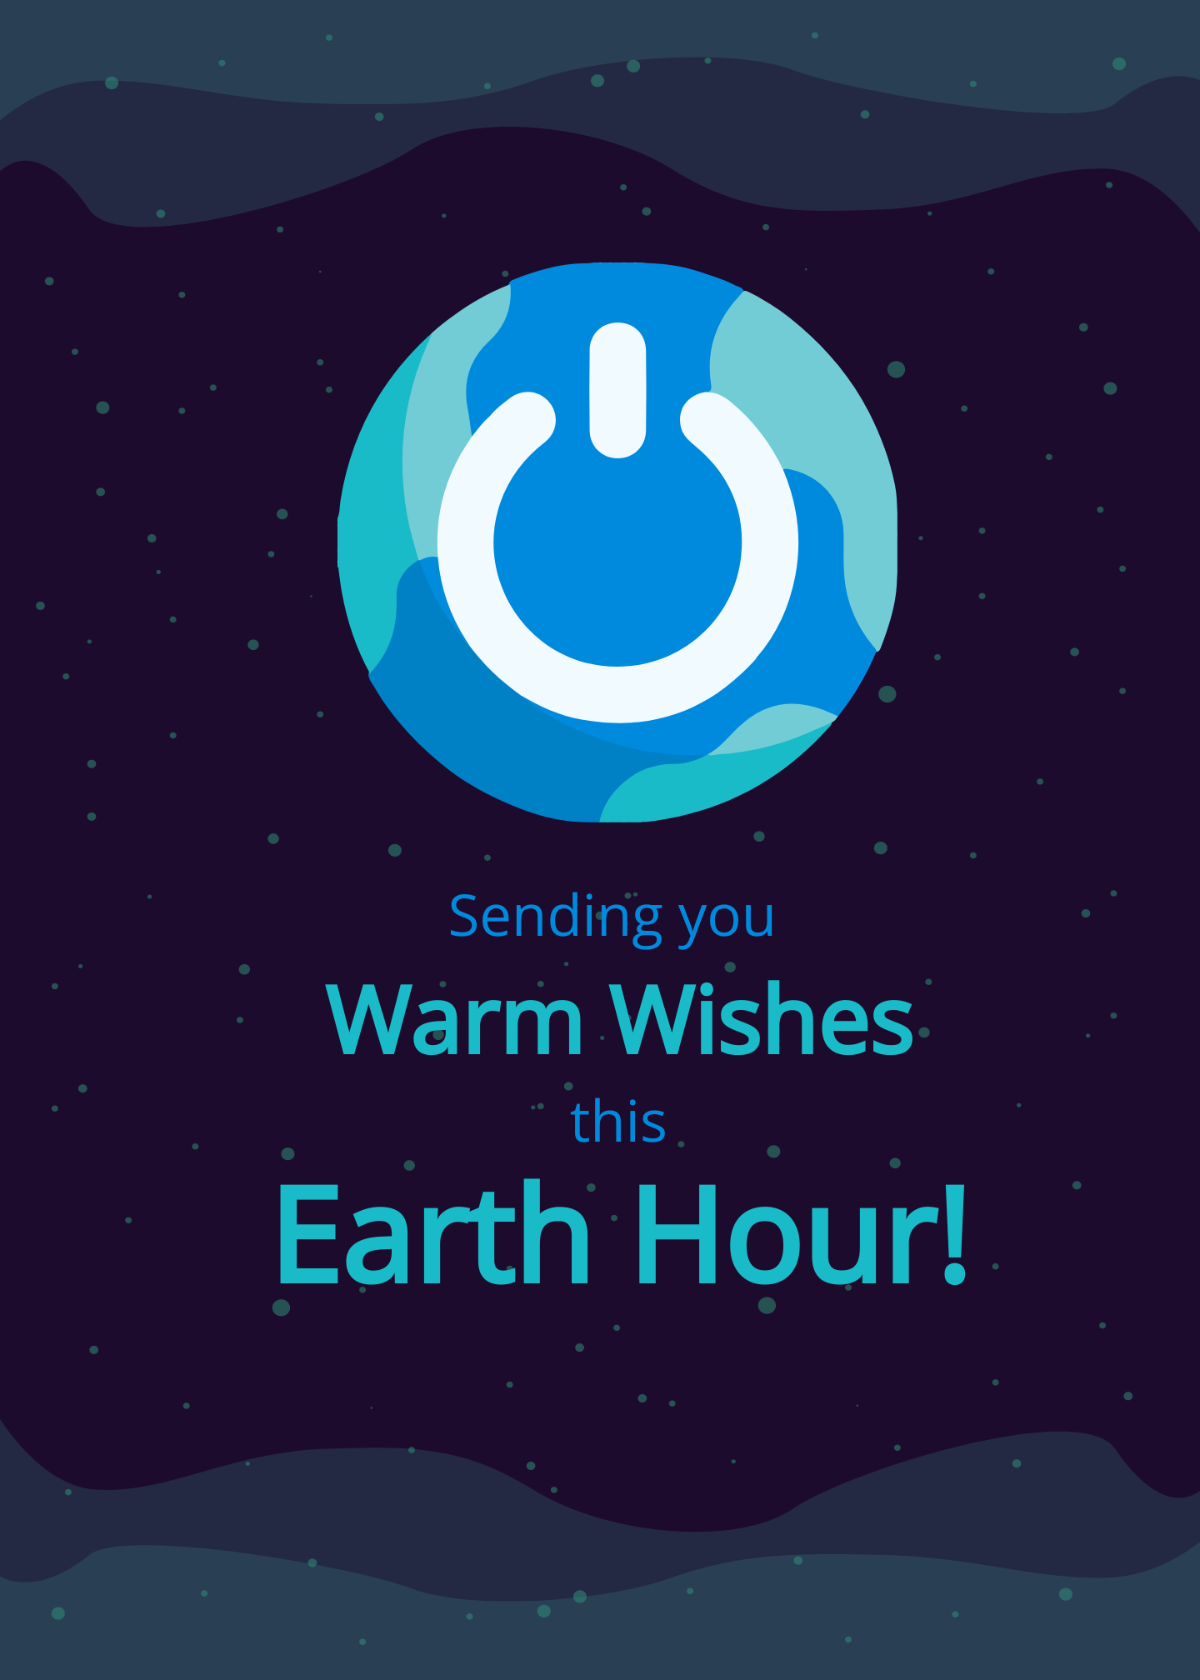 Free Earth Hour Wishes Template